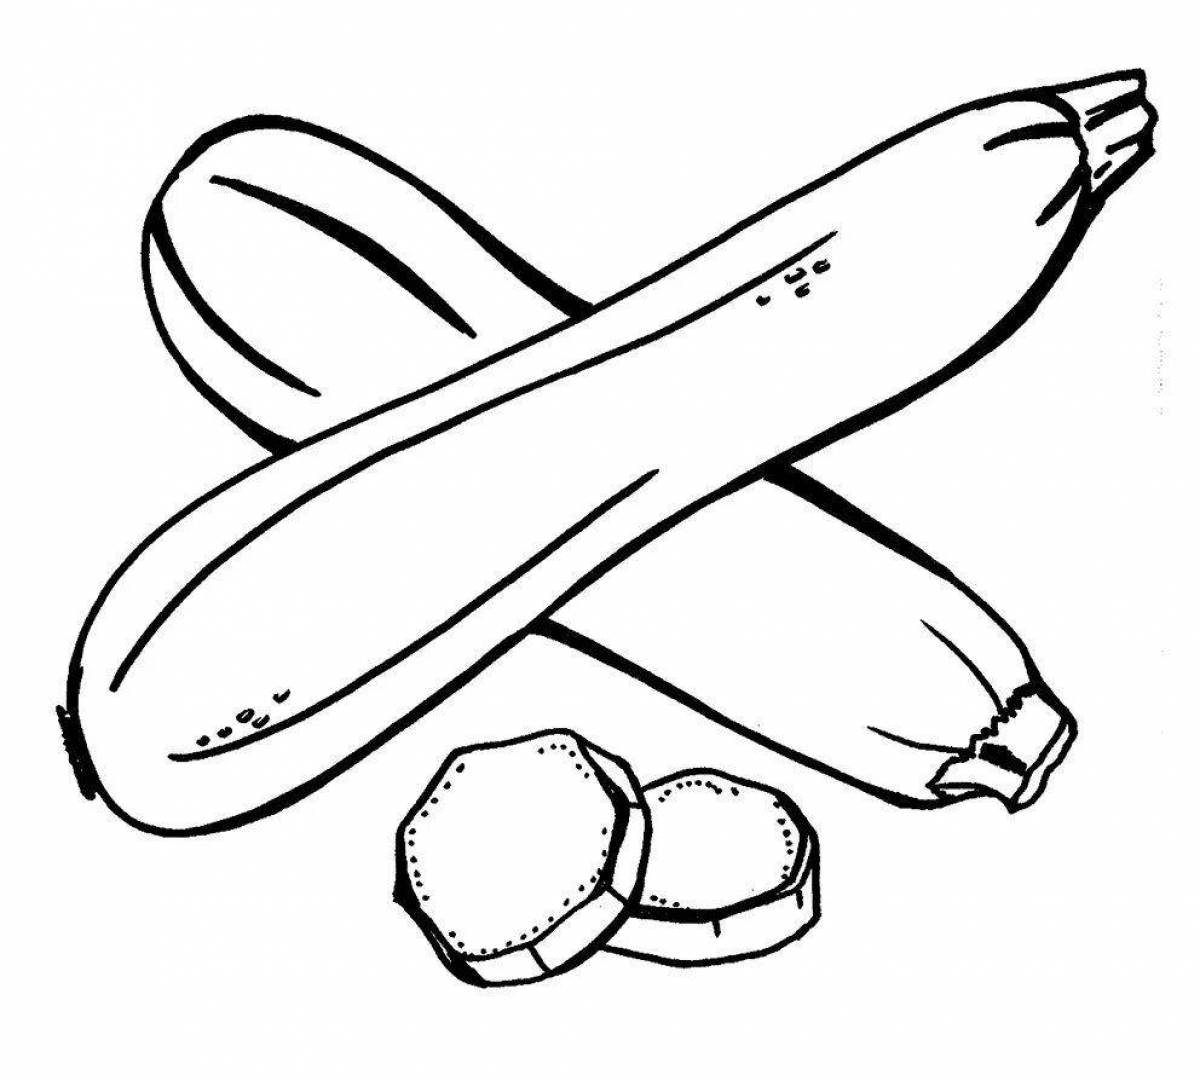 Incredible Zucchini Coloring Page